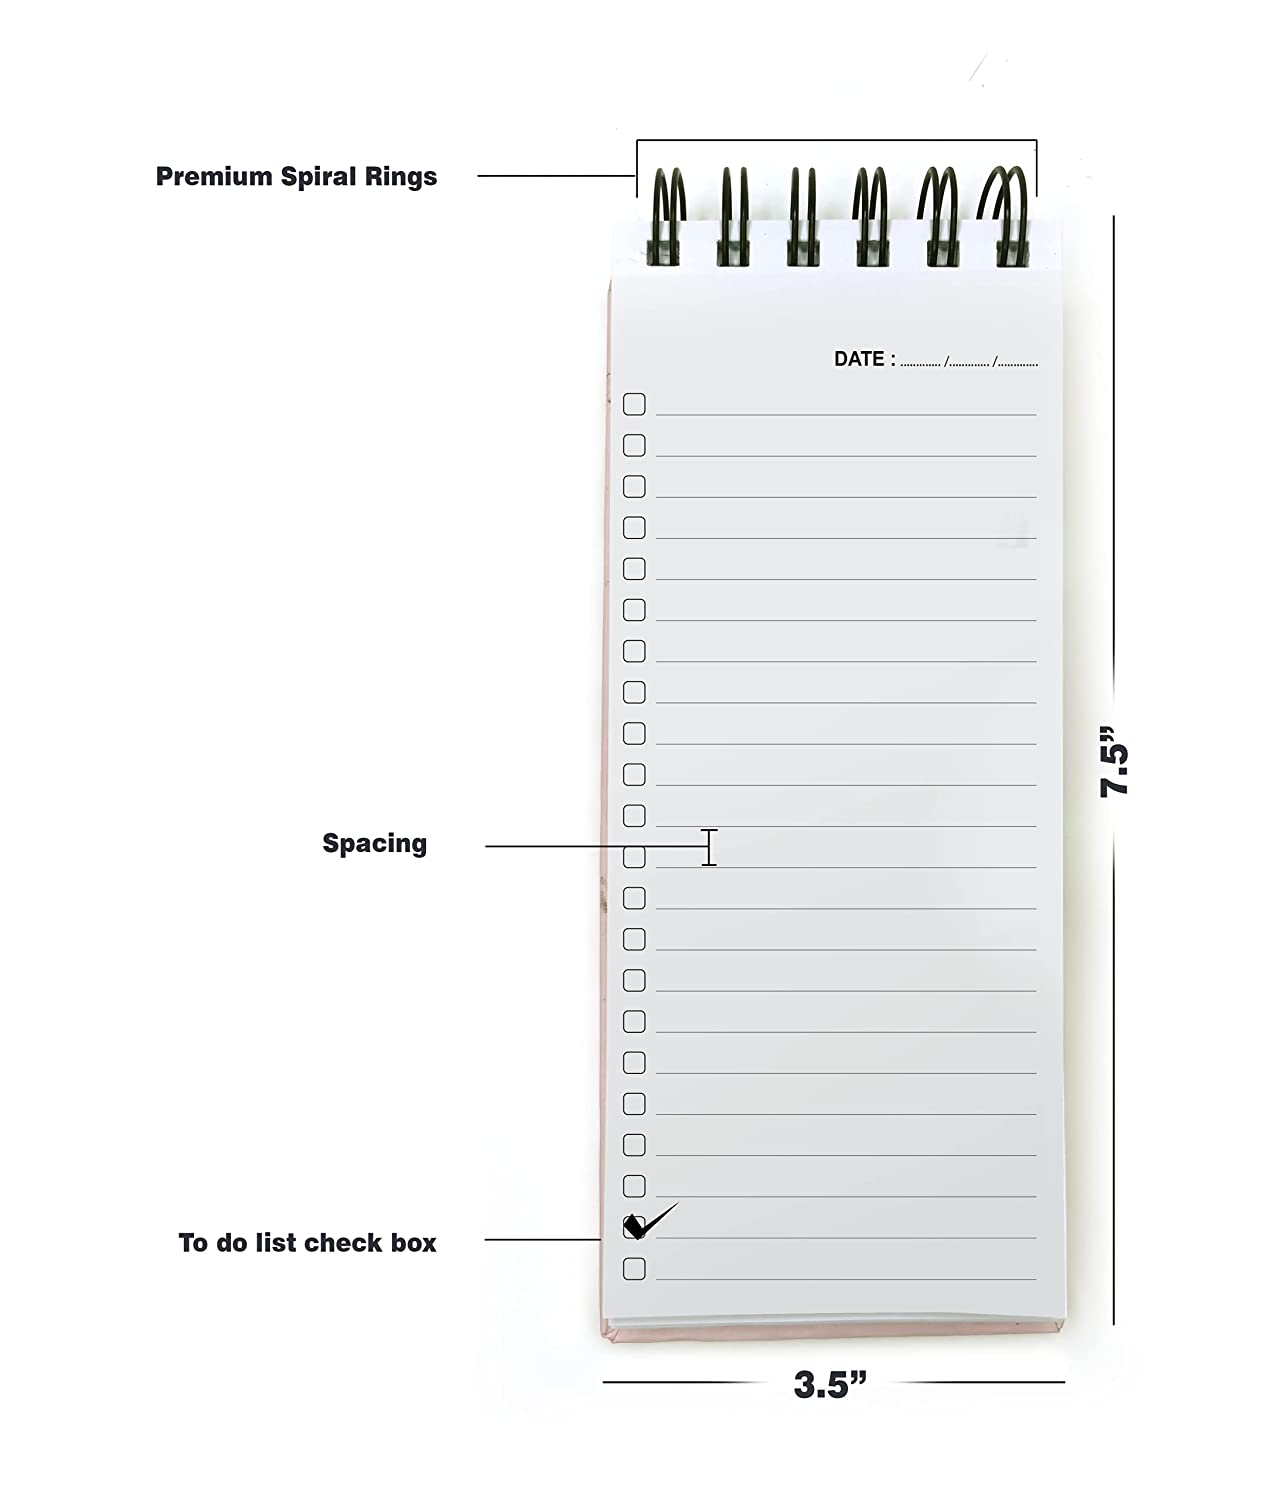 To-do List Notepads - The Umbrella store